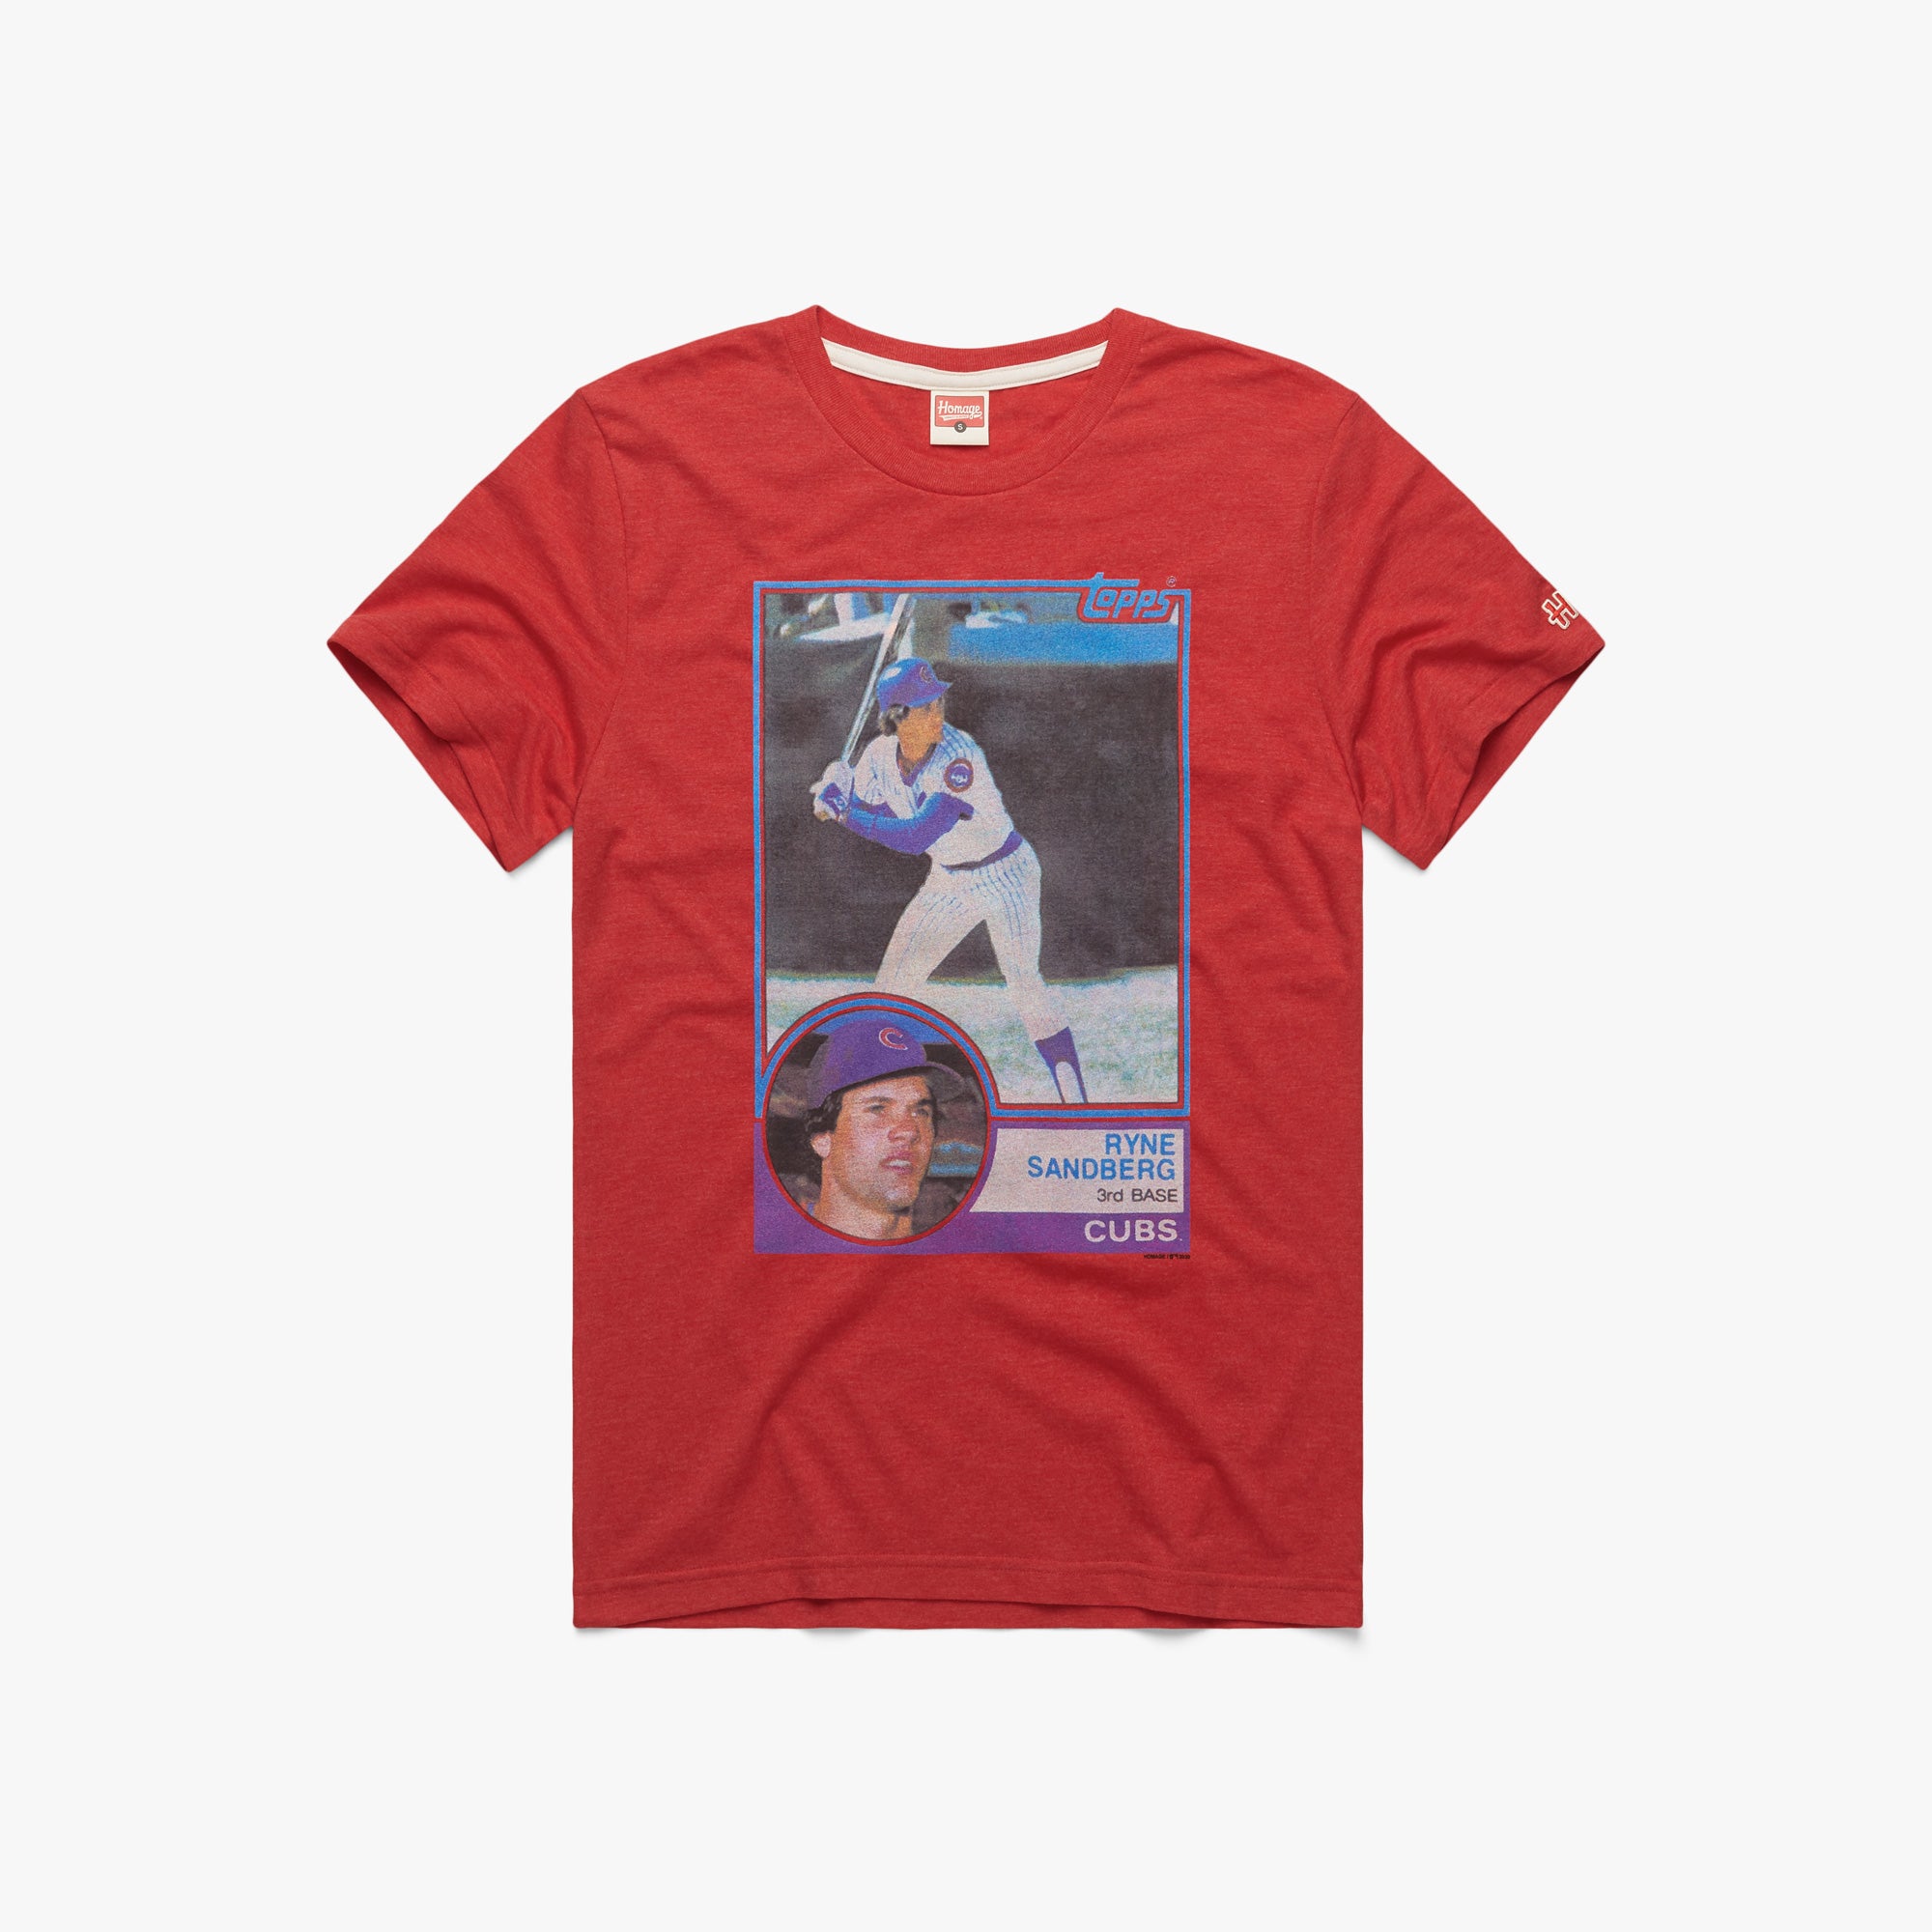 1983 Topps Rookie Ryne Sandberg Cubs T-Shirt from Homage. | Red | Vintage Apparel from Homage.